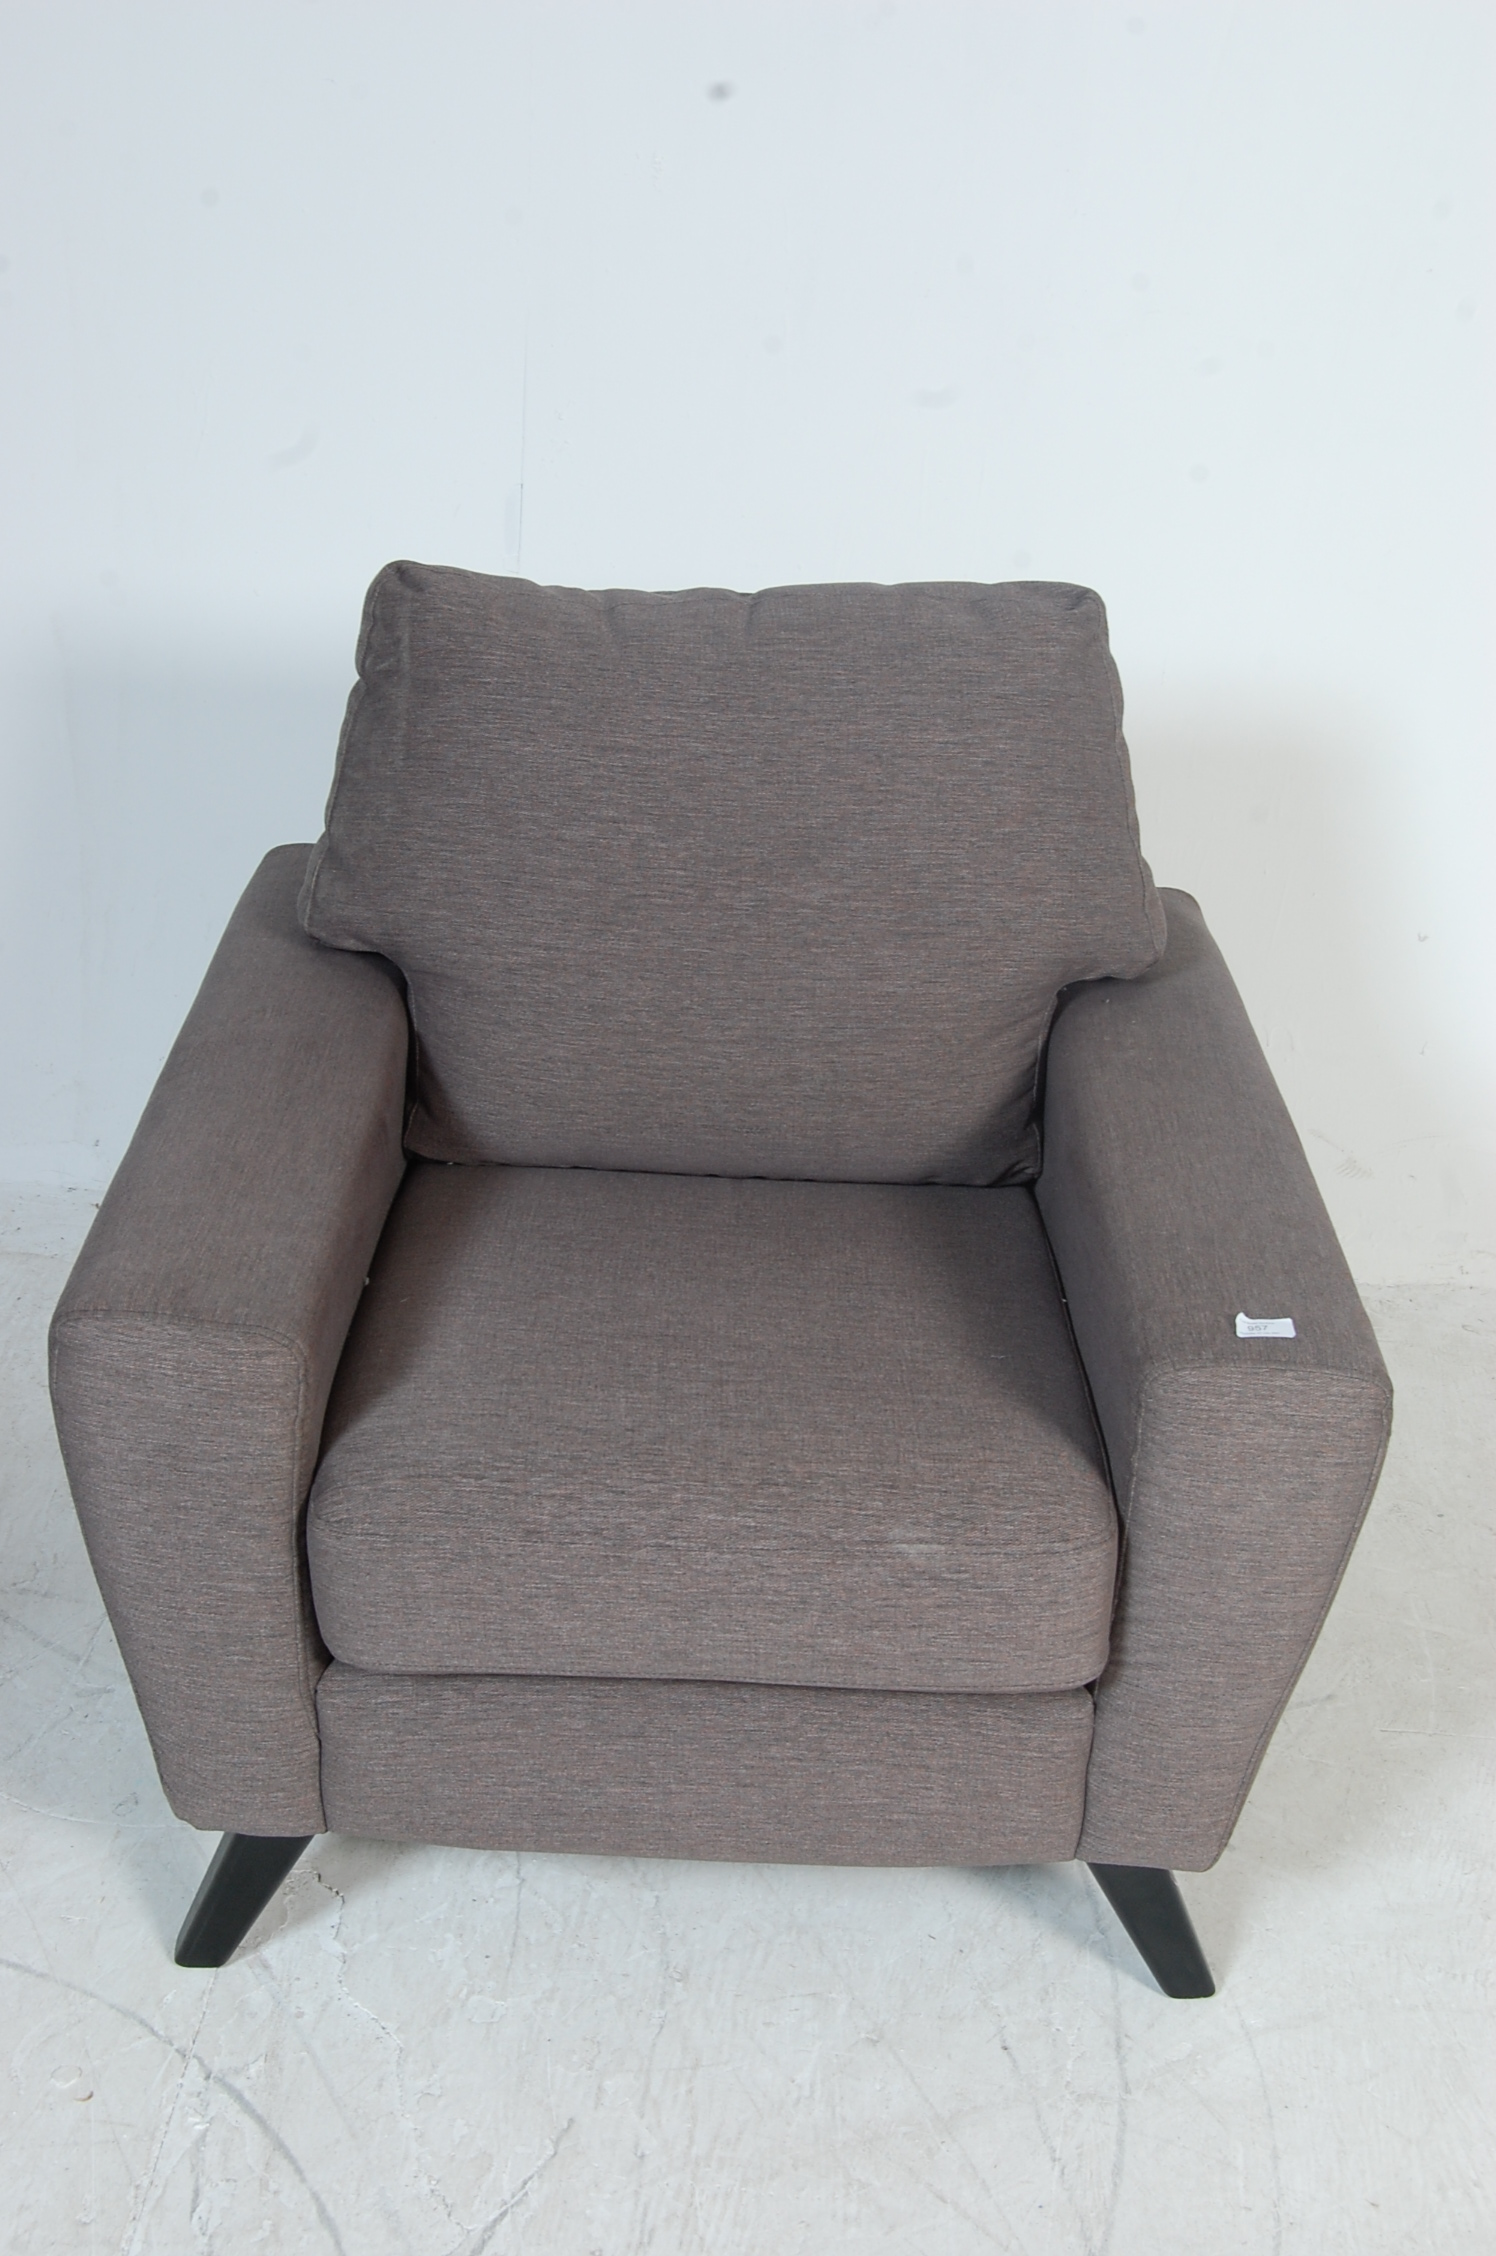 CONTEMPORARY EX SHOP STOCK G PLAN ARMCHAIR - Image 2 of 7